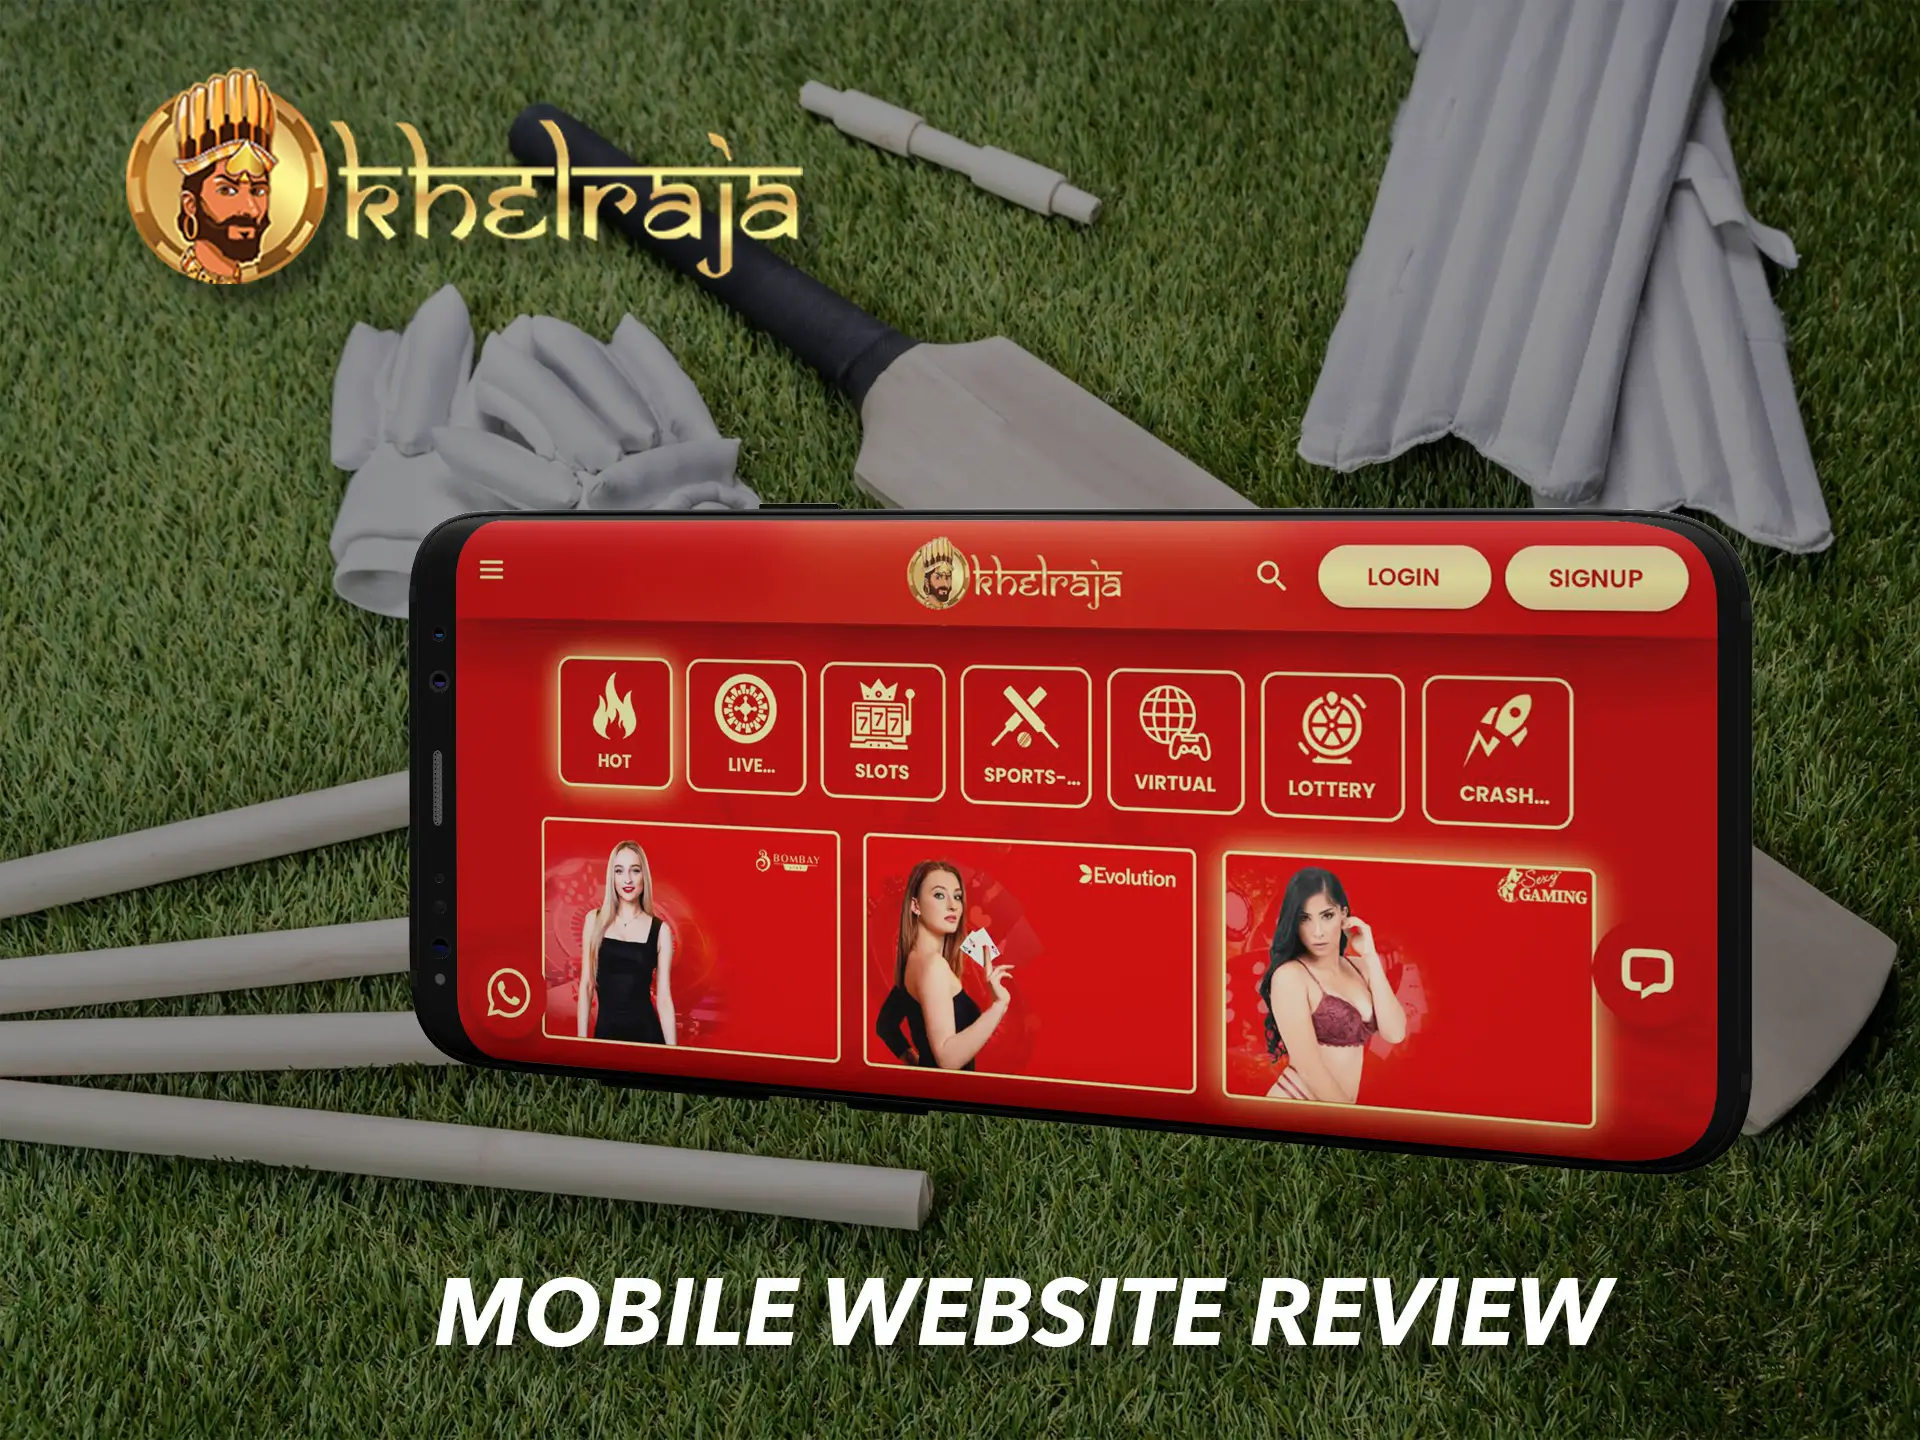 Khelraja's mobile site adapts perfectly and works quickly on any device.